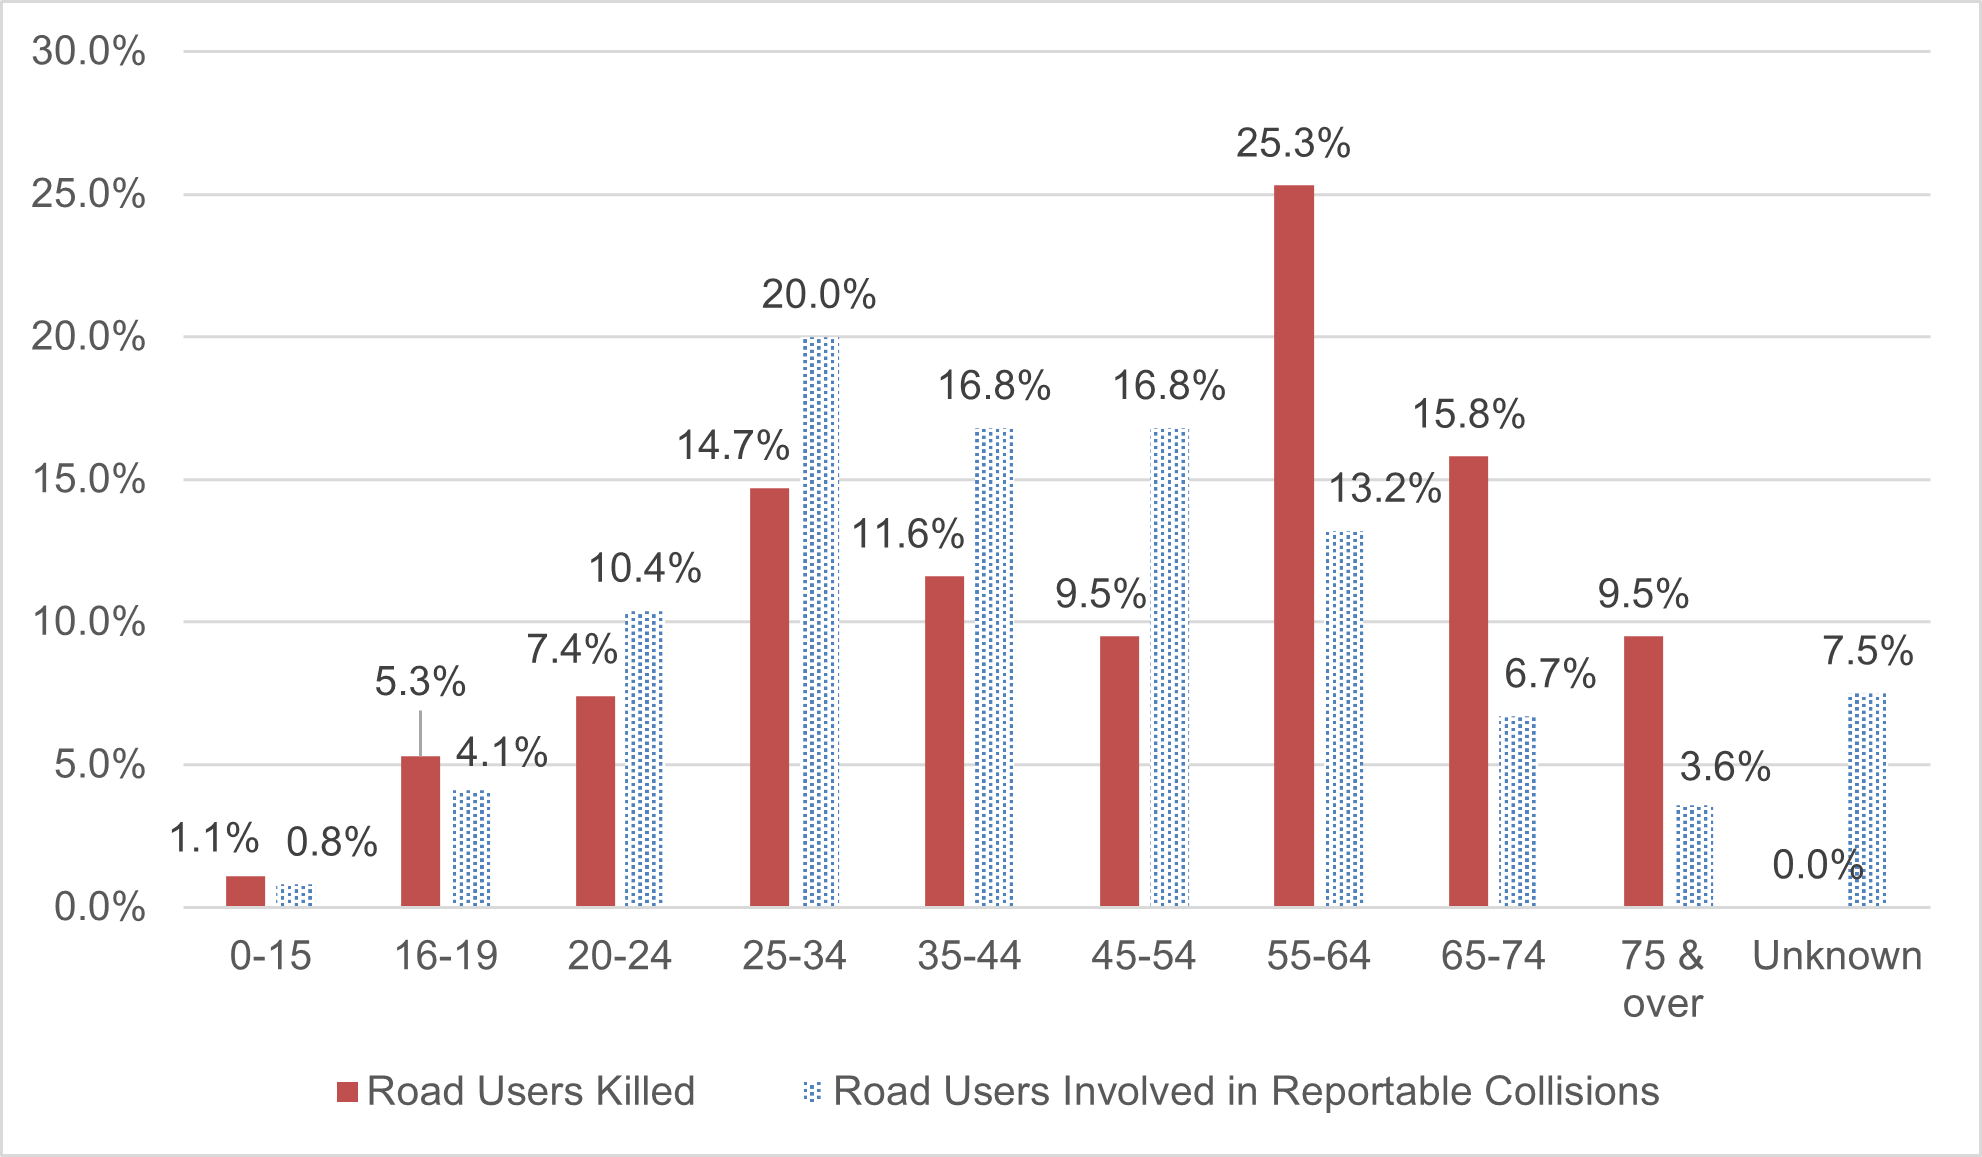 Figure 11 demonstrates the number of road users killed and the number of road users involved in reportable collisions according to age category. 